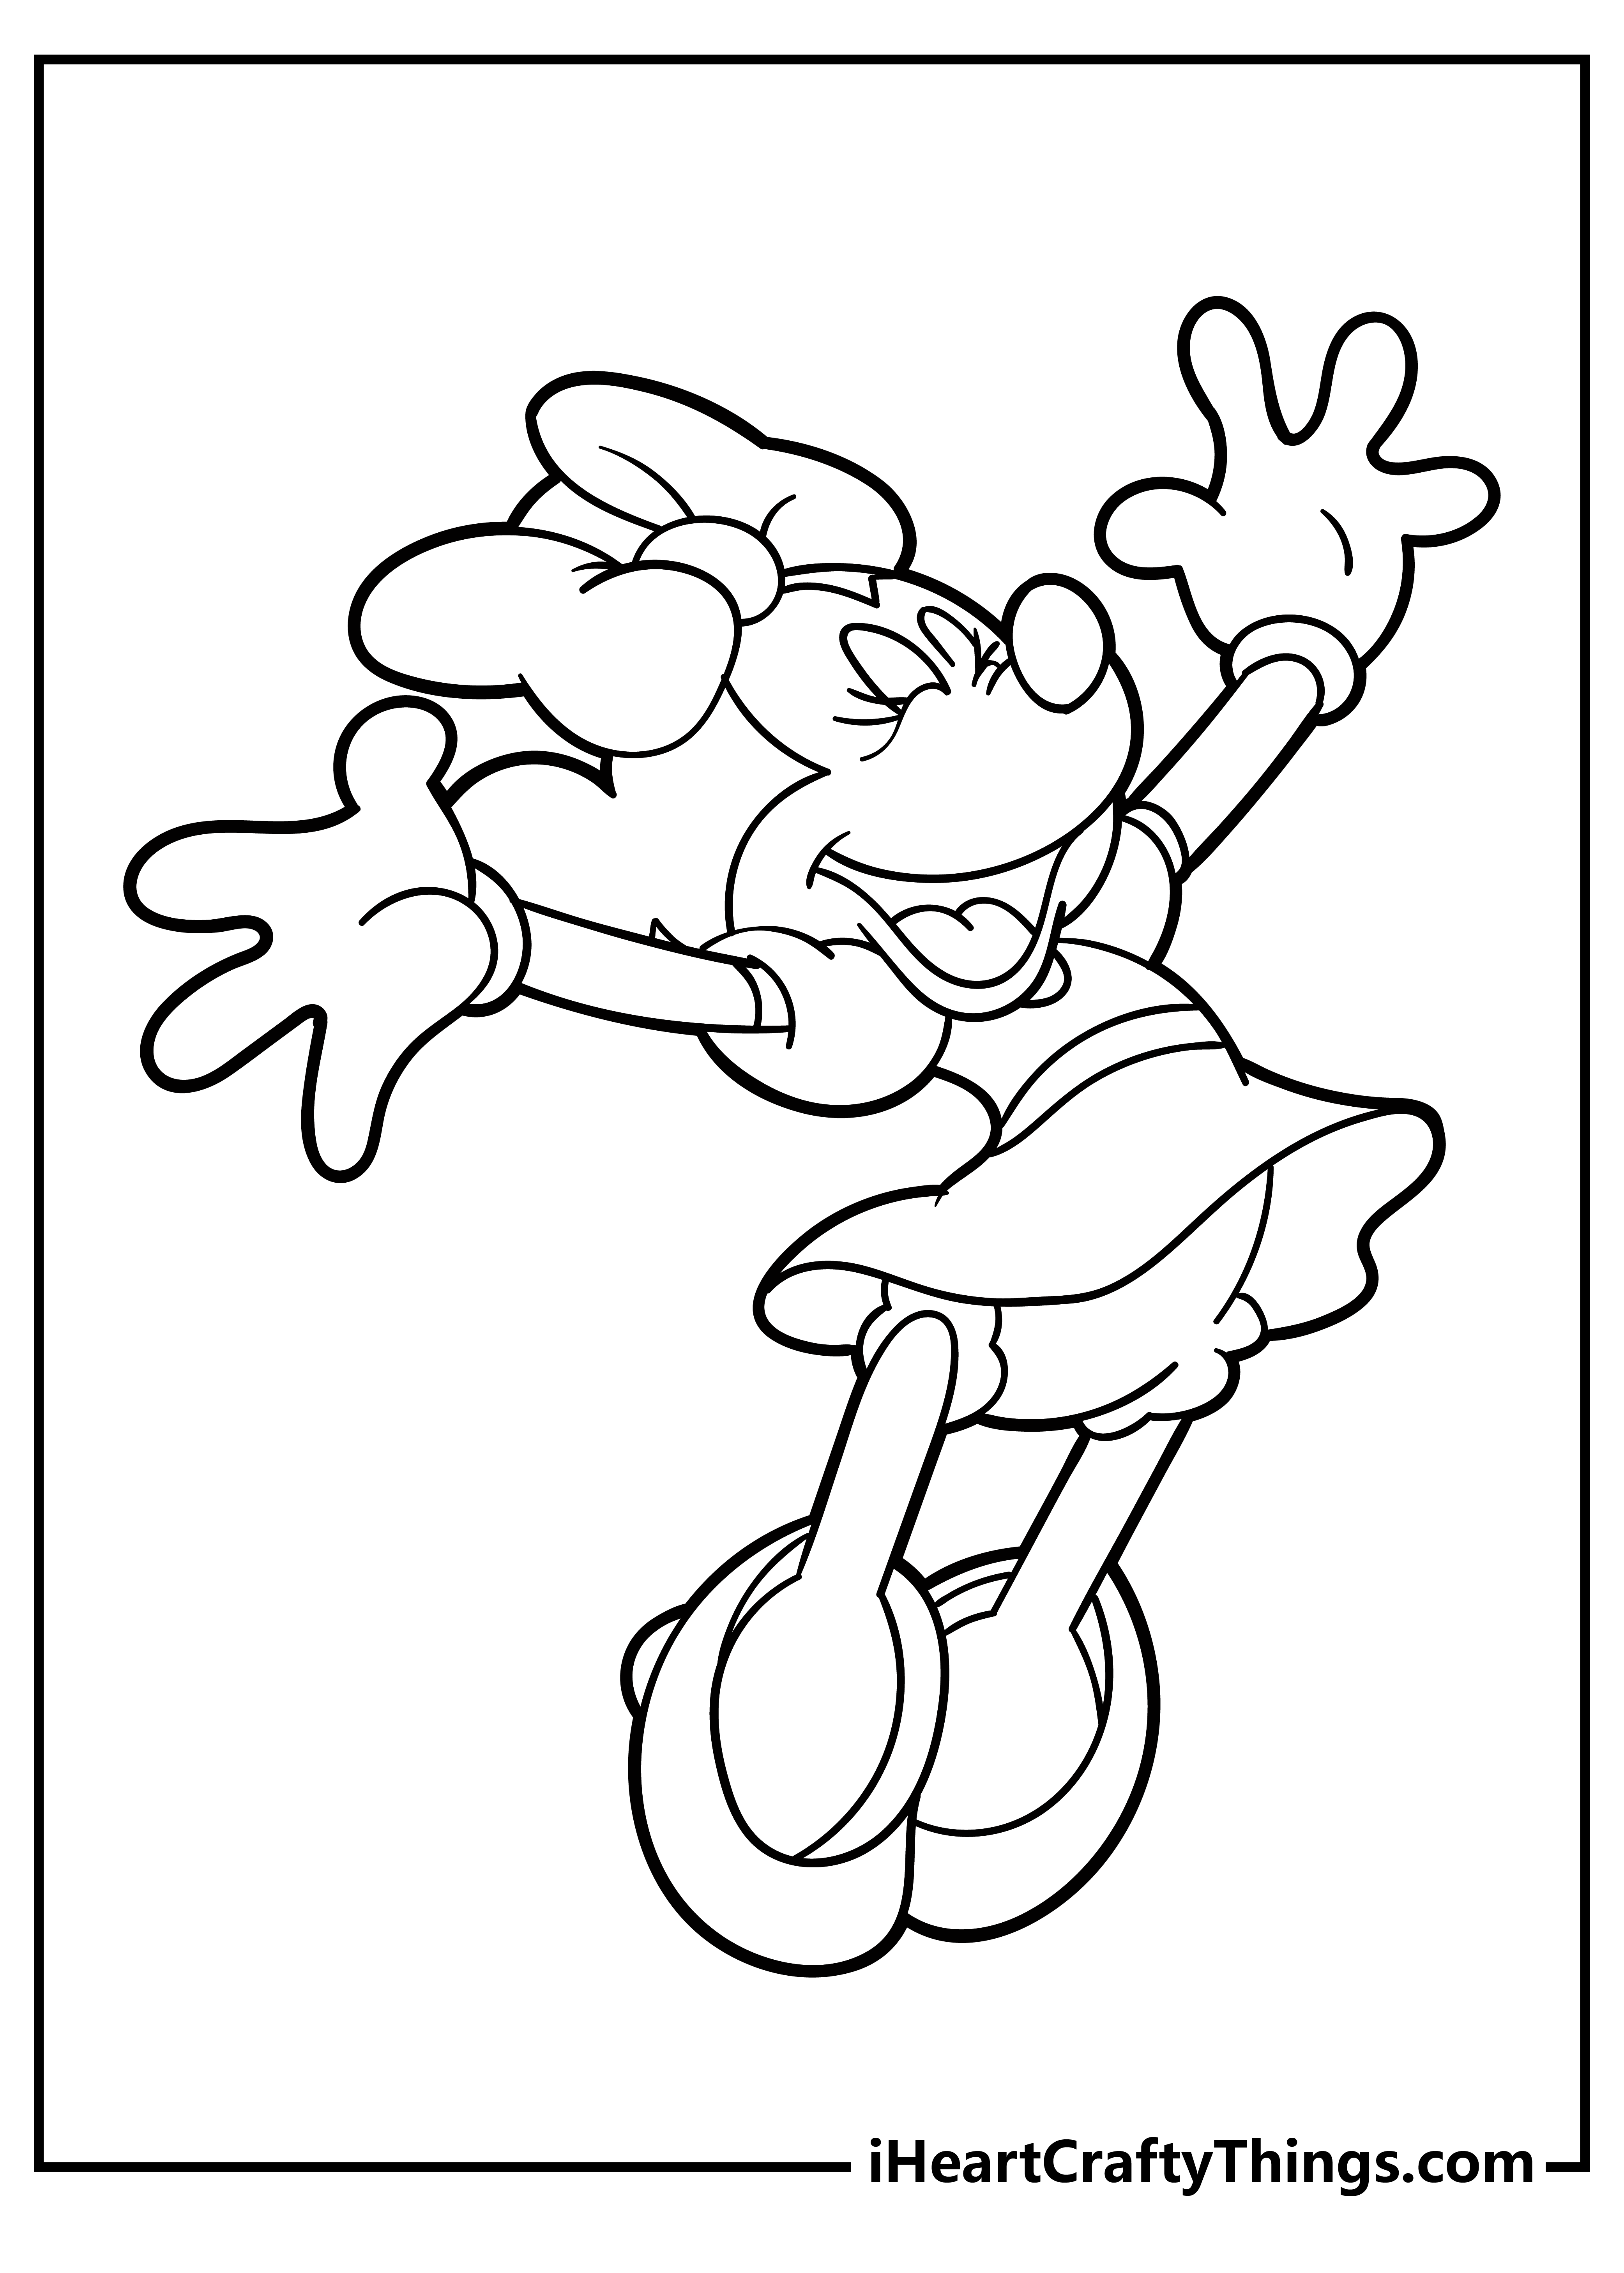 Minnie Mouse Coloring Pages free pdf download